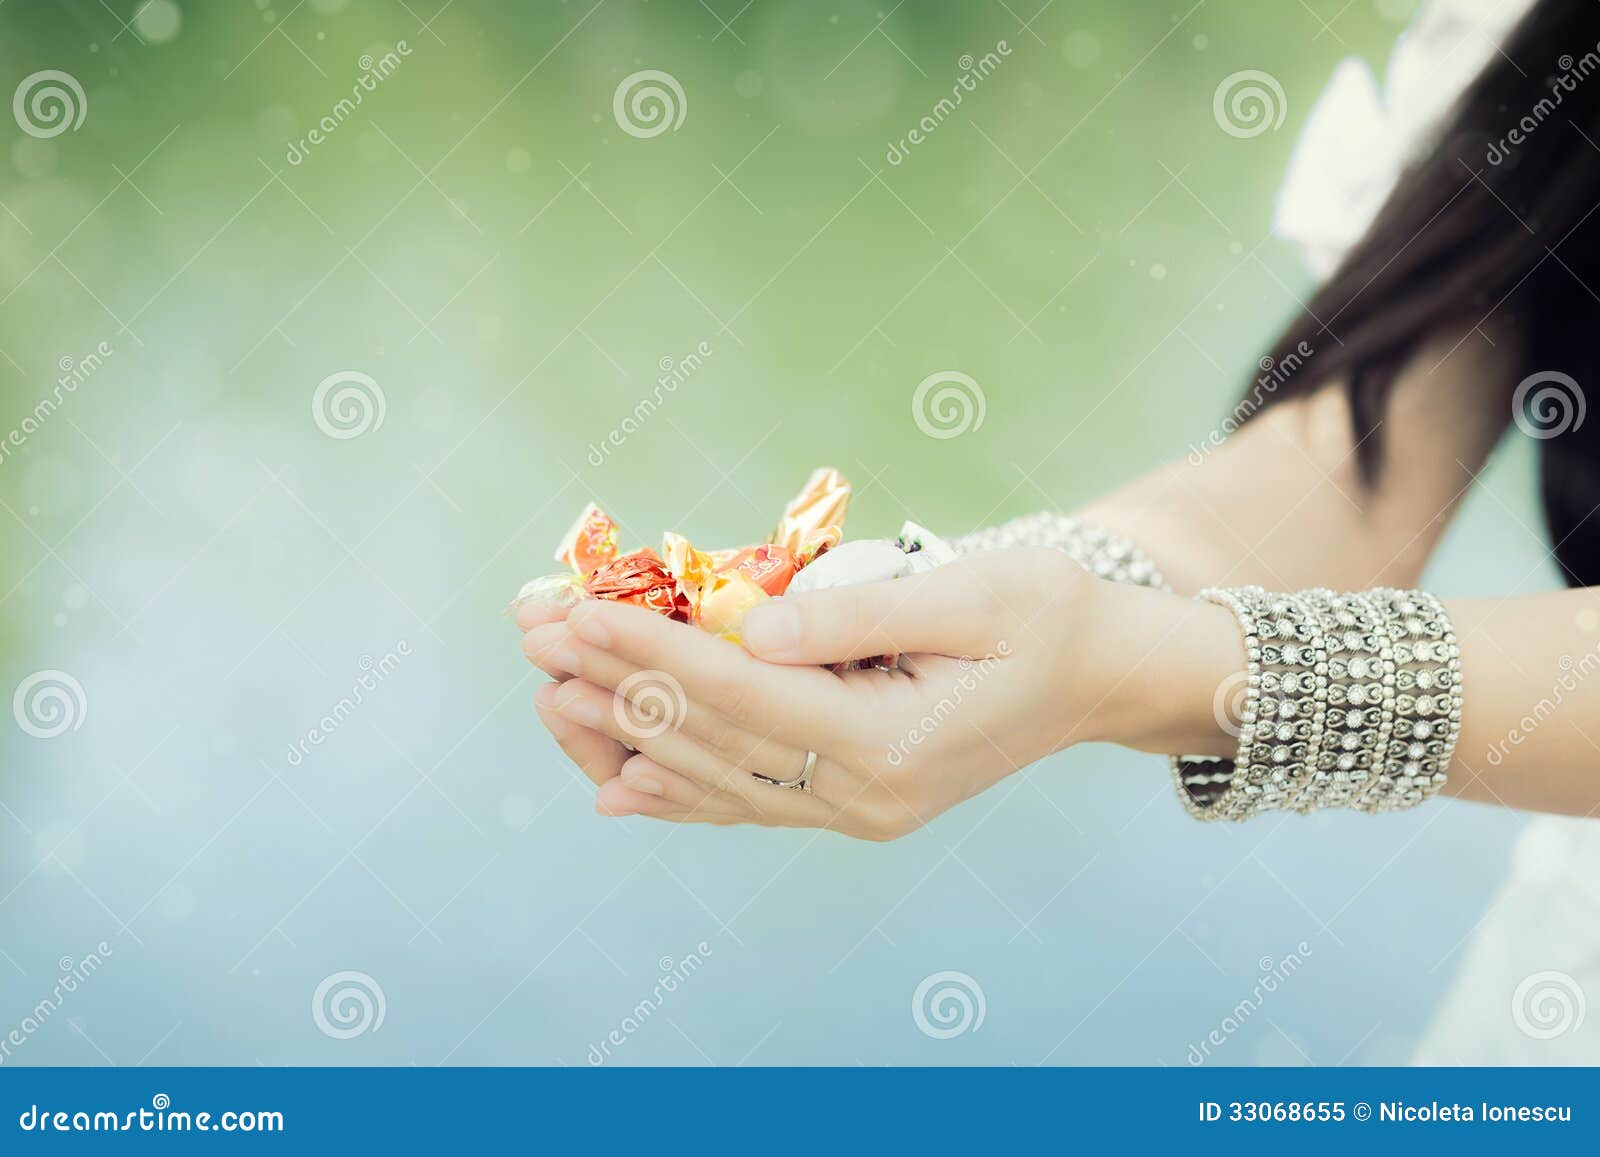 496 Candy Bracelet Stock Photos - Free & Royalty-Free Stock Photos from  Dreamstime